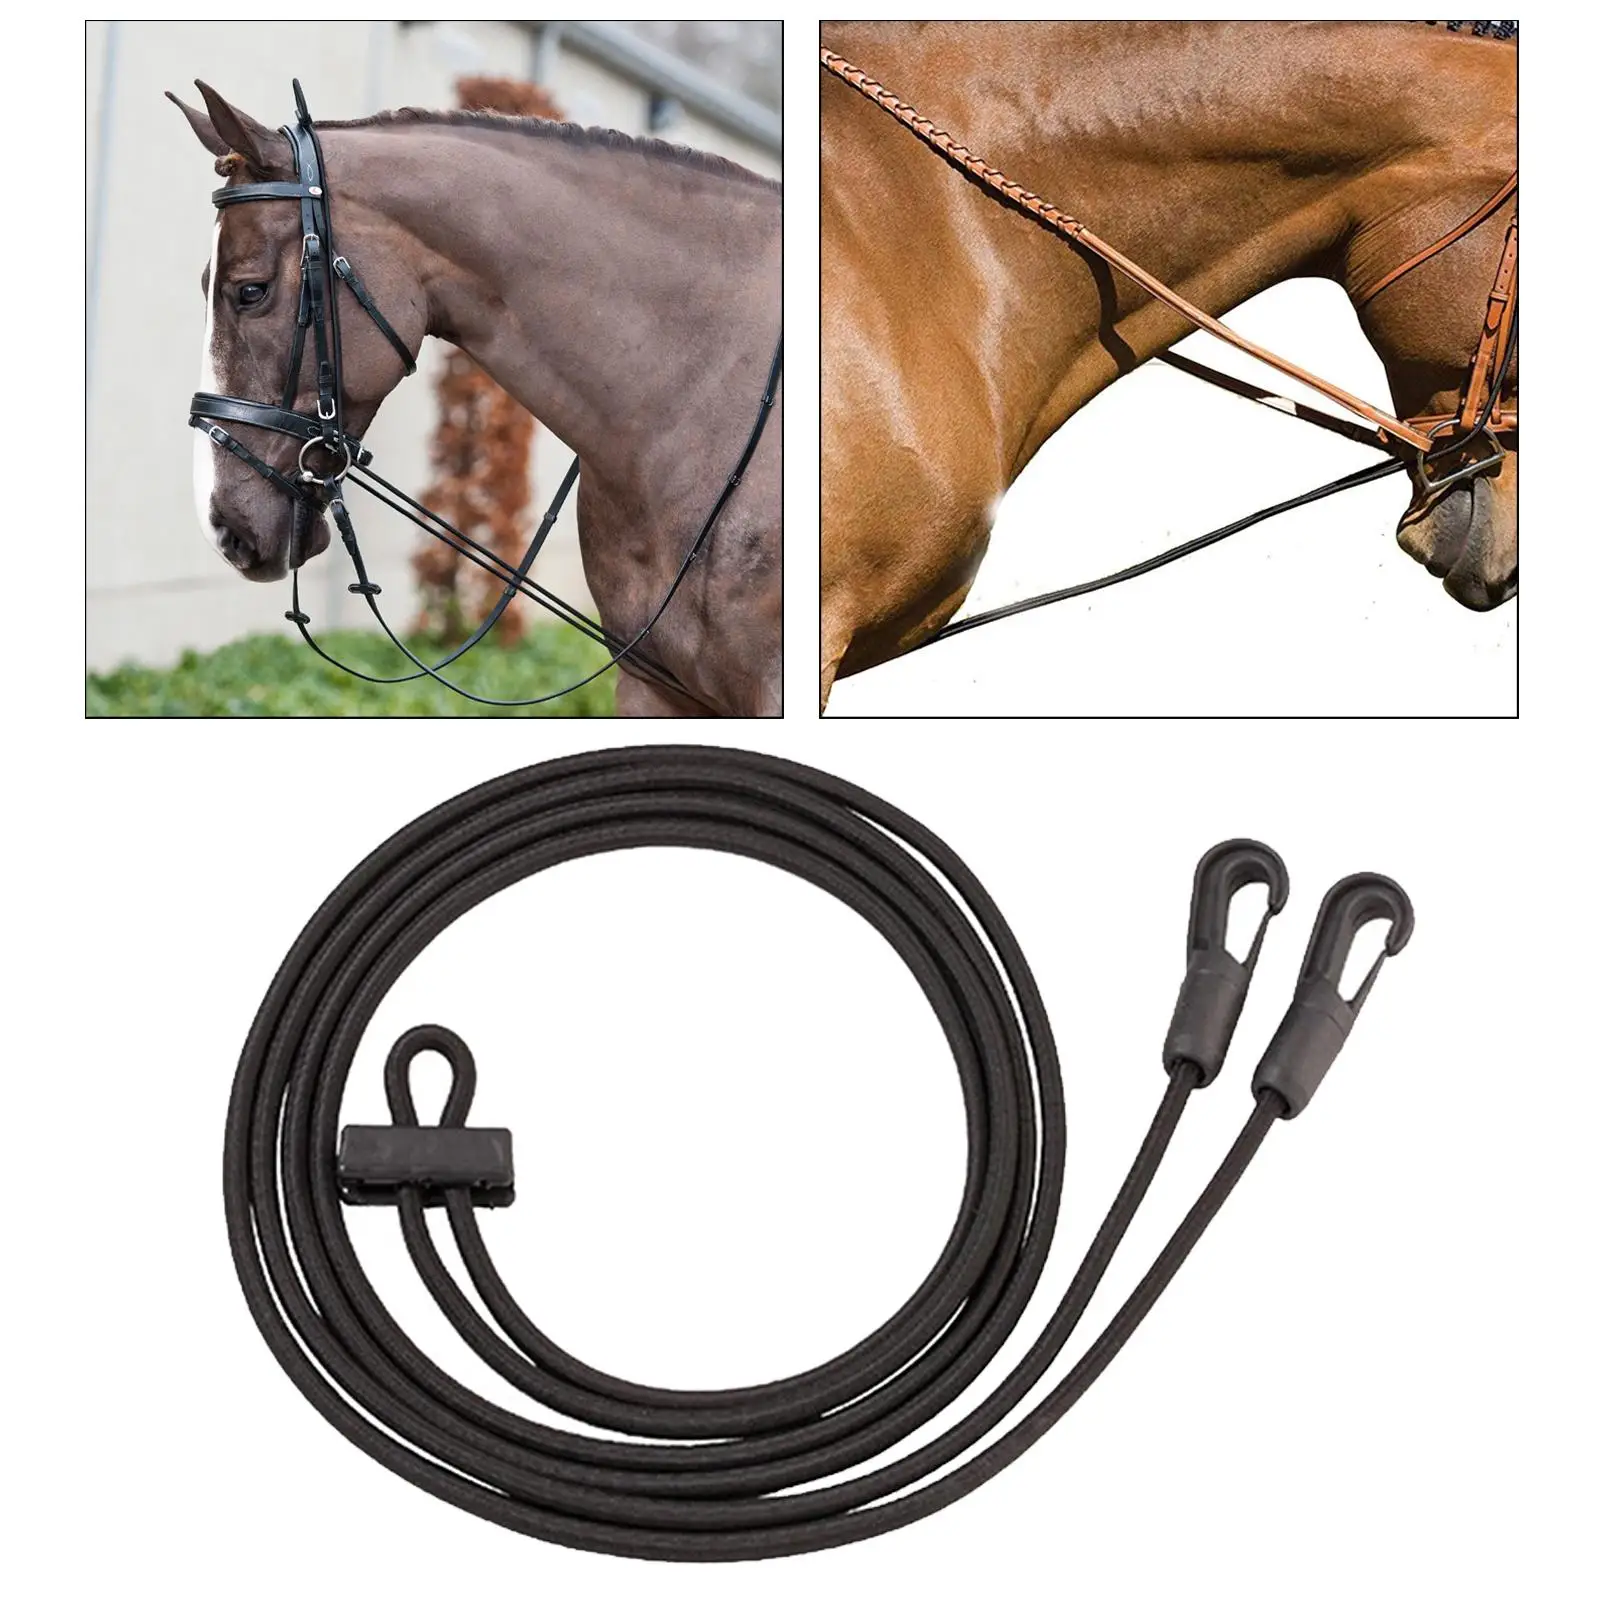 3 Roping Reins, Training Rope Comfortable Adjustable stretcher fo neck for Racecourse Correct Aid   Horse Horses Equipment